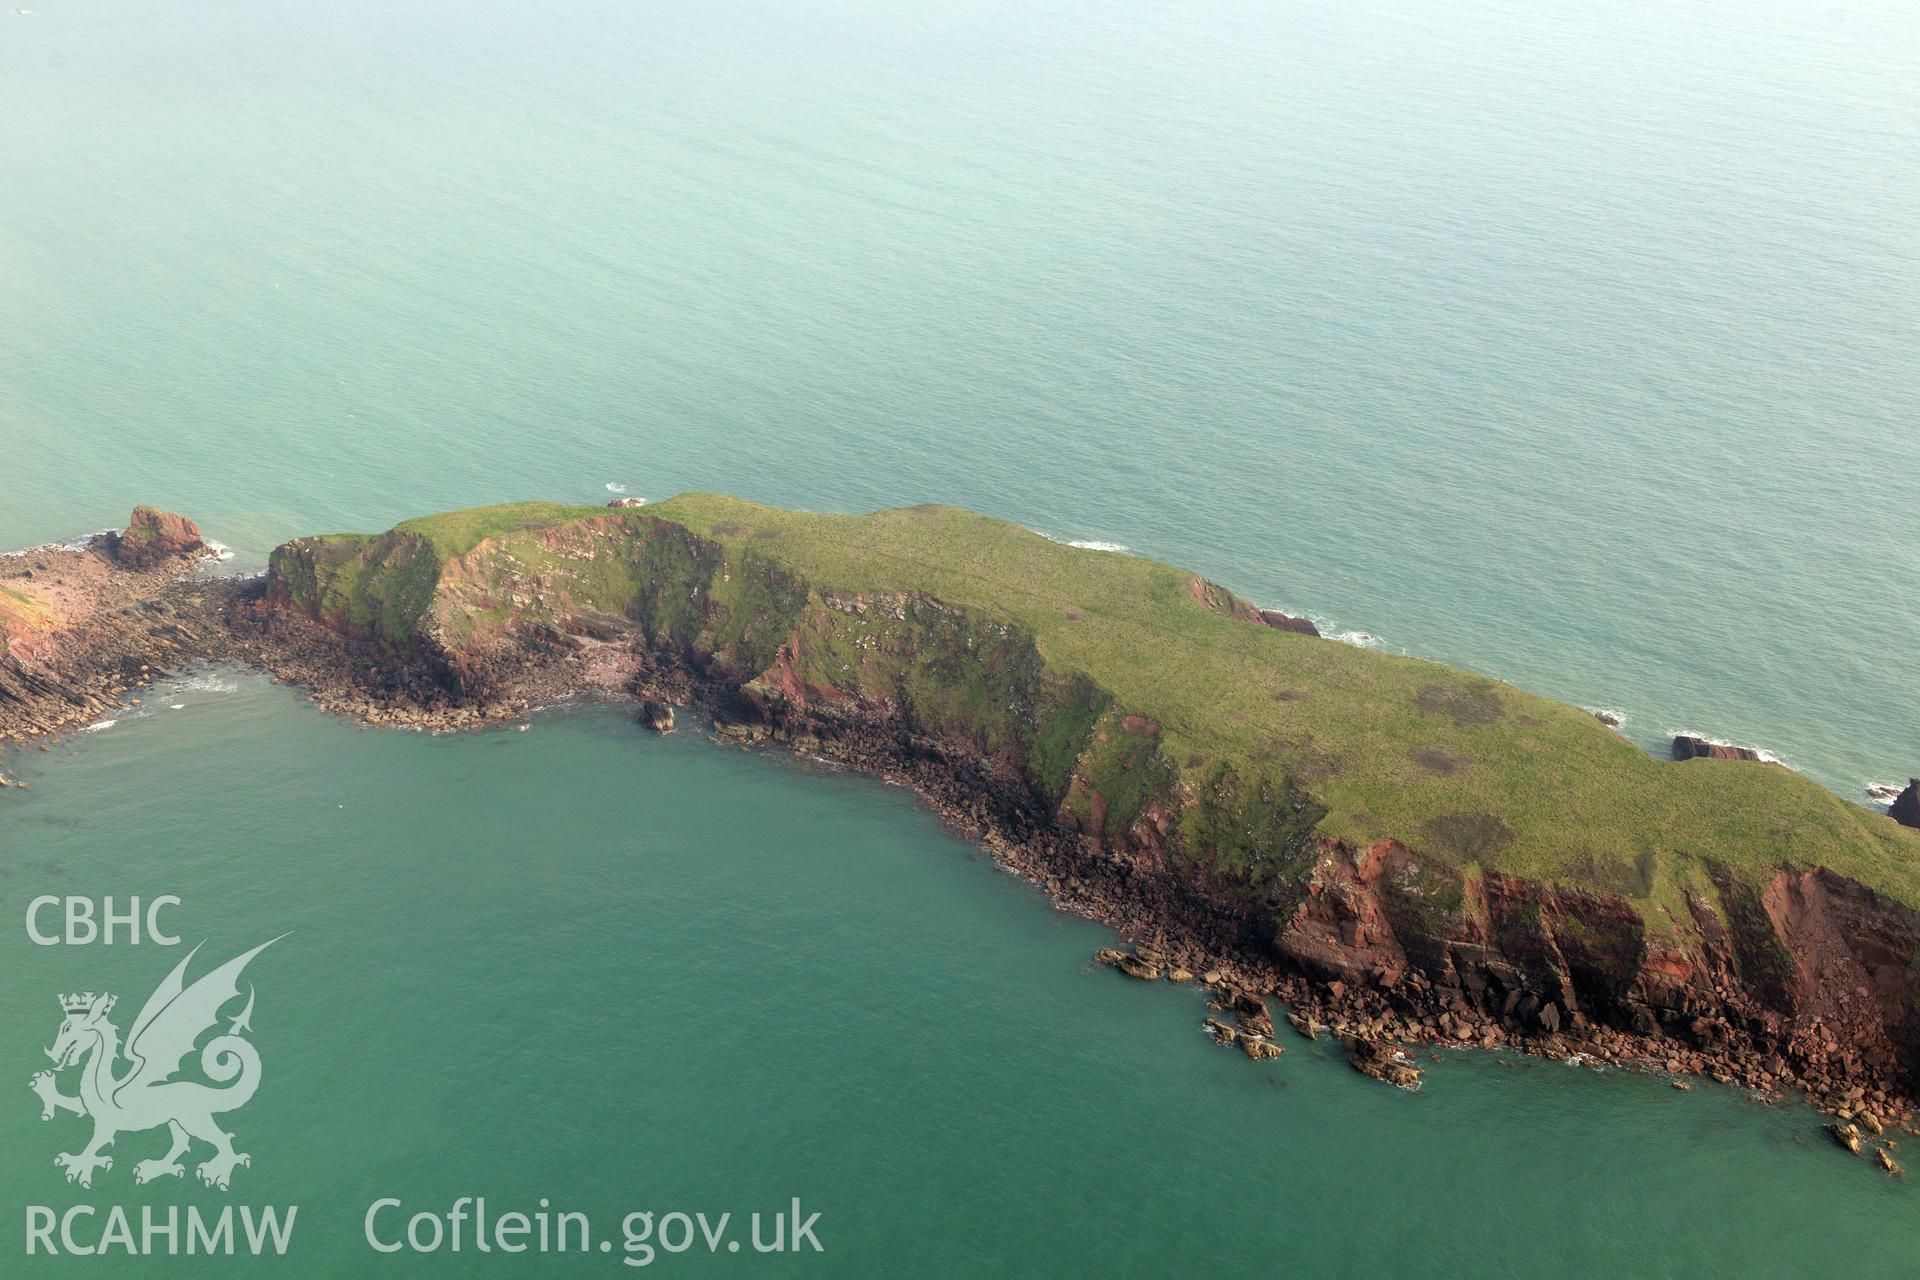 Aerial photography of Gateholm taken on 27th March 2017. Baseline aerial reconnaissance survey for the CHERISH Project. ? Crown: CHERISH PROJECT 2019. Produced with EU funds through the Ireland Wales Co-operation Programme 2014-2020. All material made freely available through the Open Government Licence.